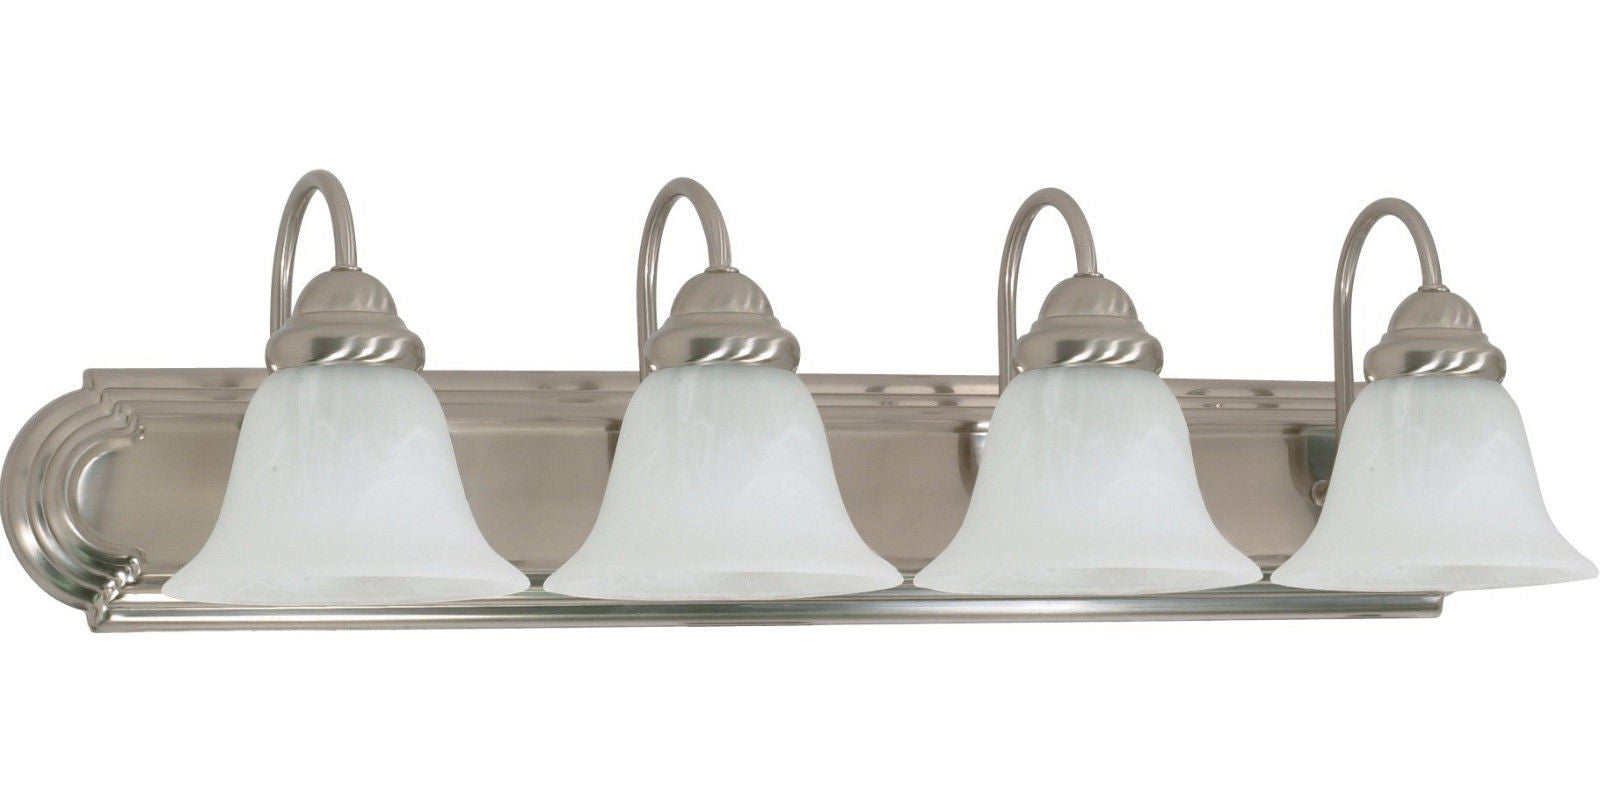 Epiphany Lighting 106048BN-252 Four Light Bath Wall Fixture in Brushed Nickel Finish